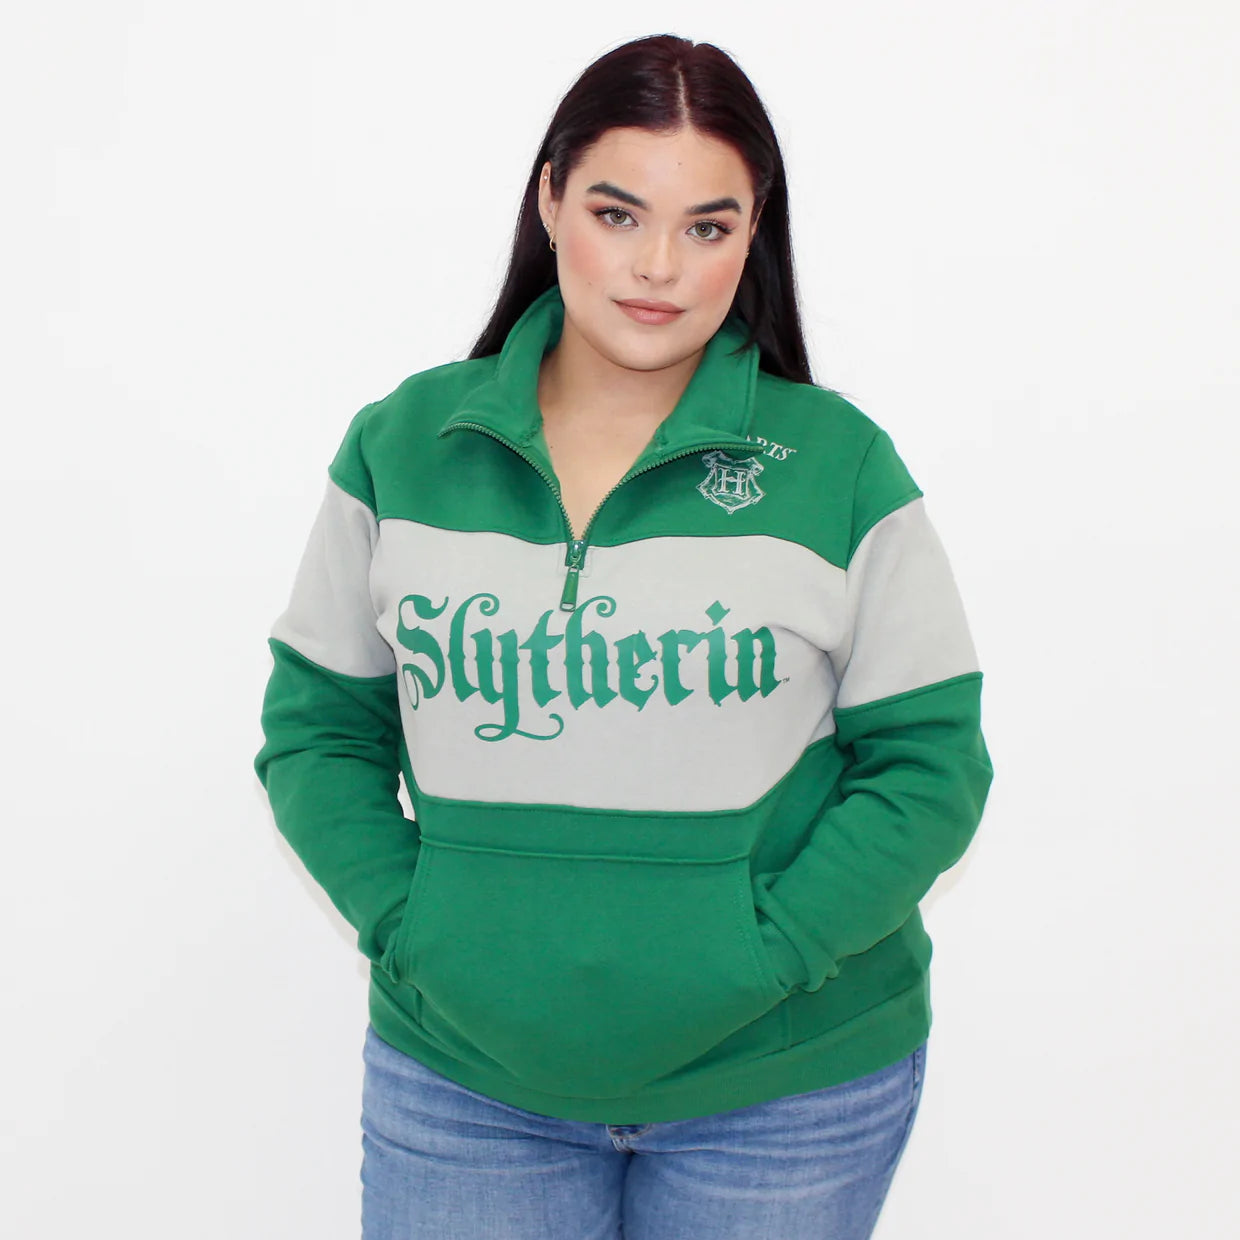 Load image into Gallery viewer, *Clearance* Slytherin (Harry Potter) Pullover Sweater by Cakeworthy
